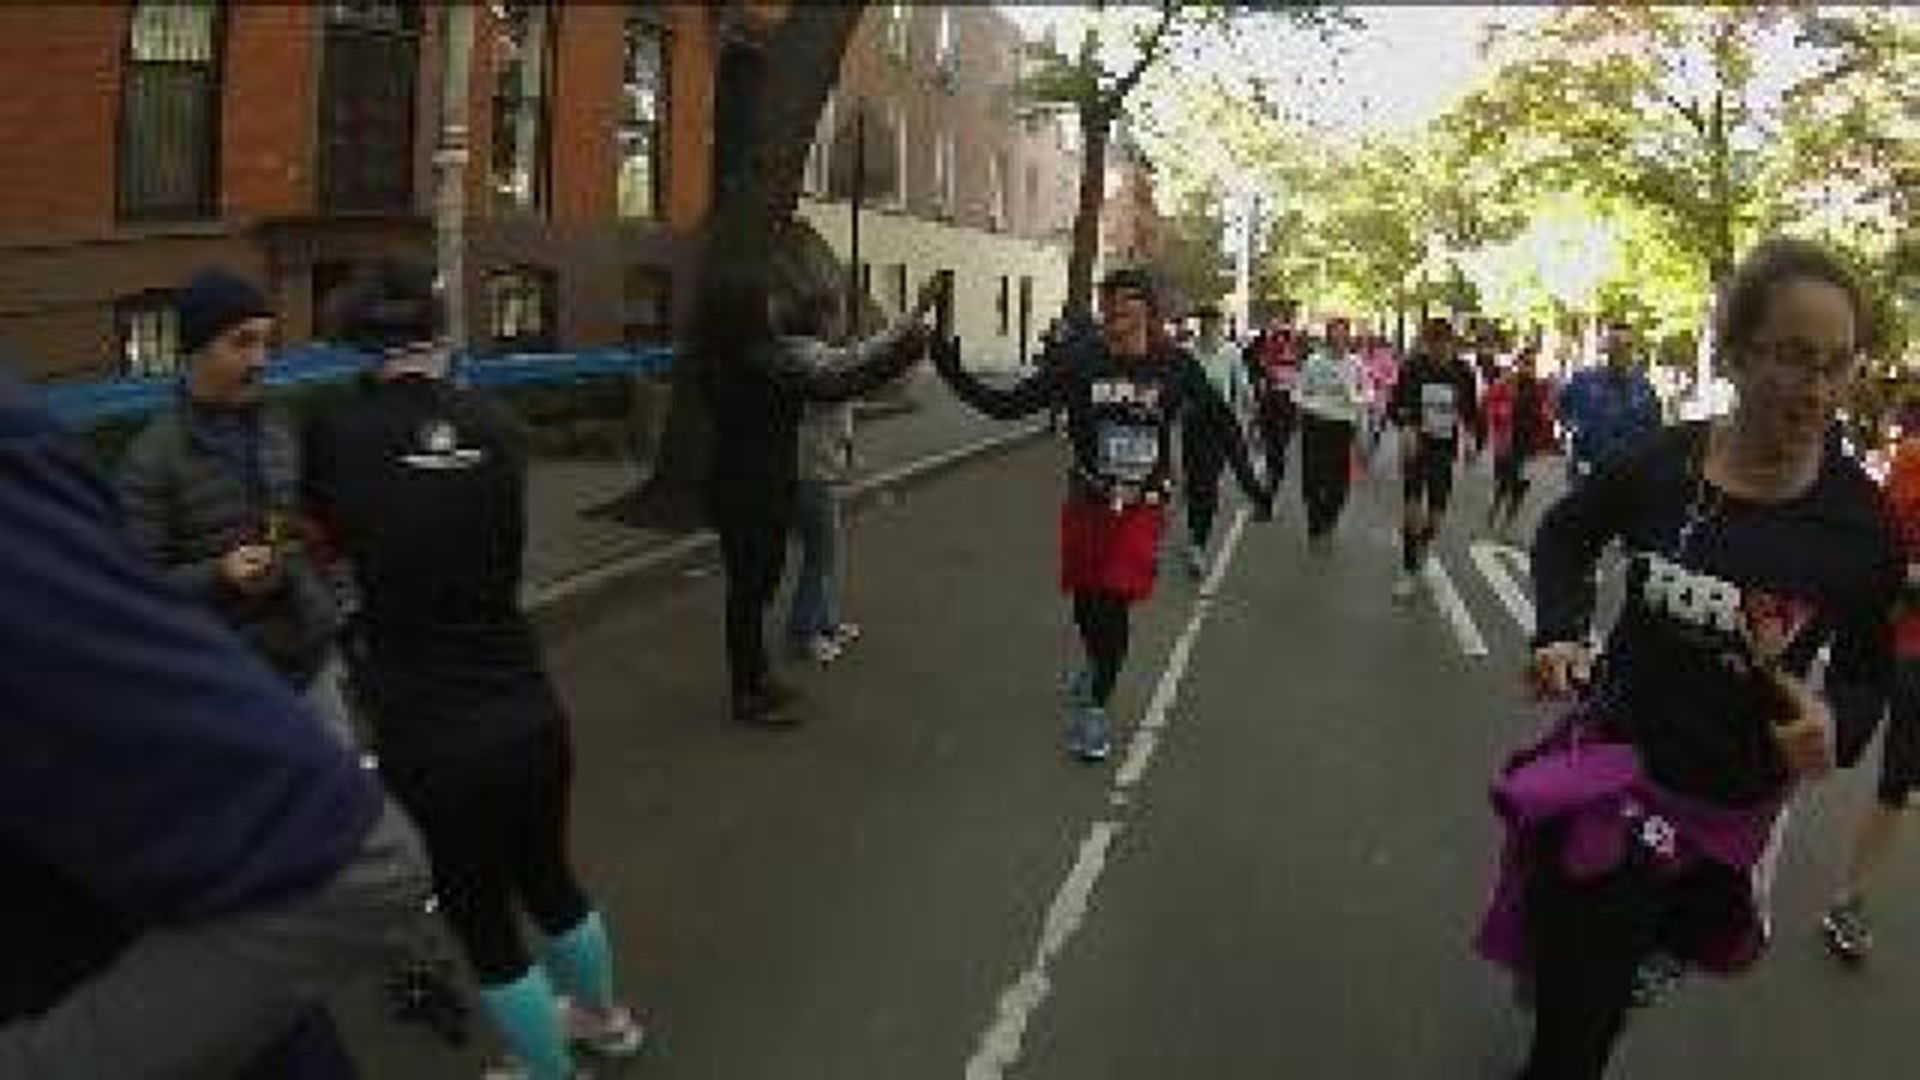 Leckey Time: Unseen Video of Leckey Running in NYC